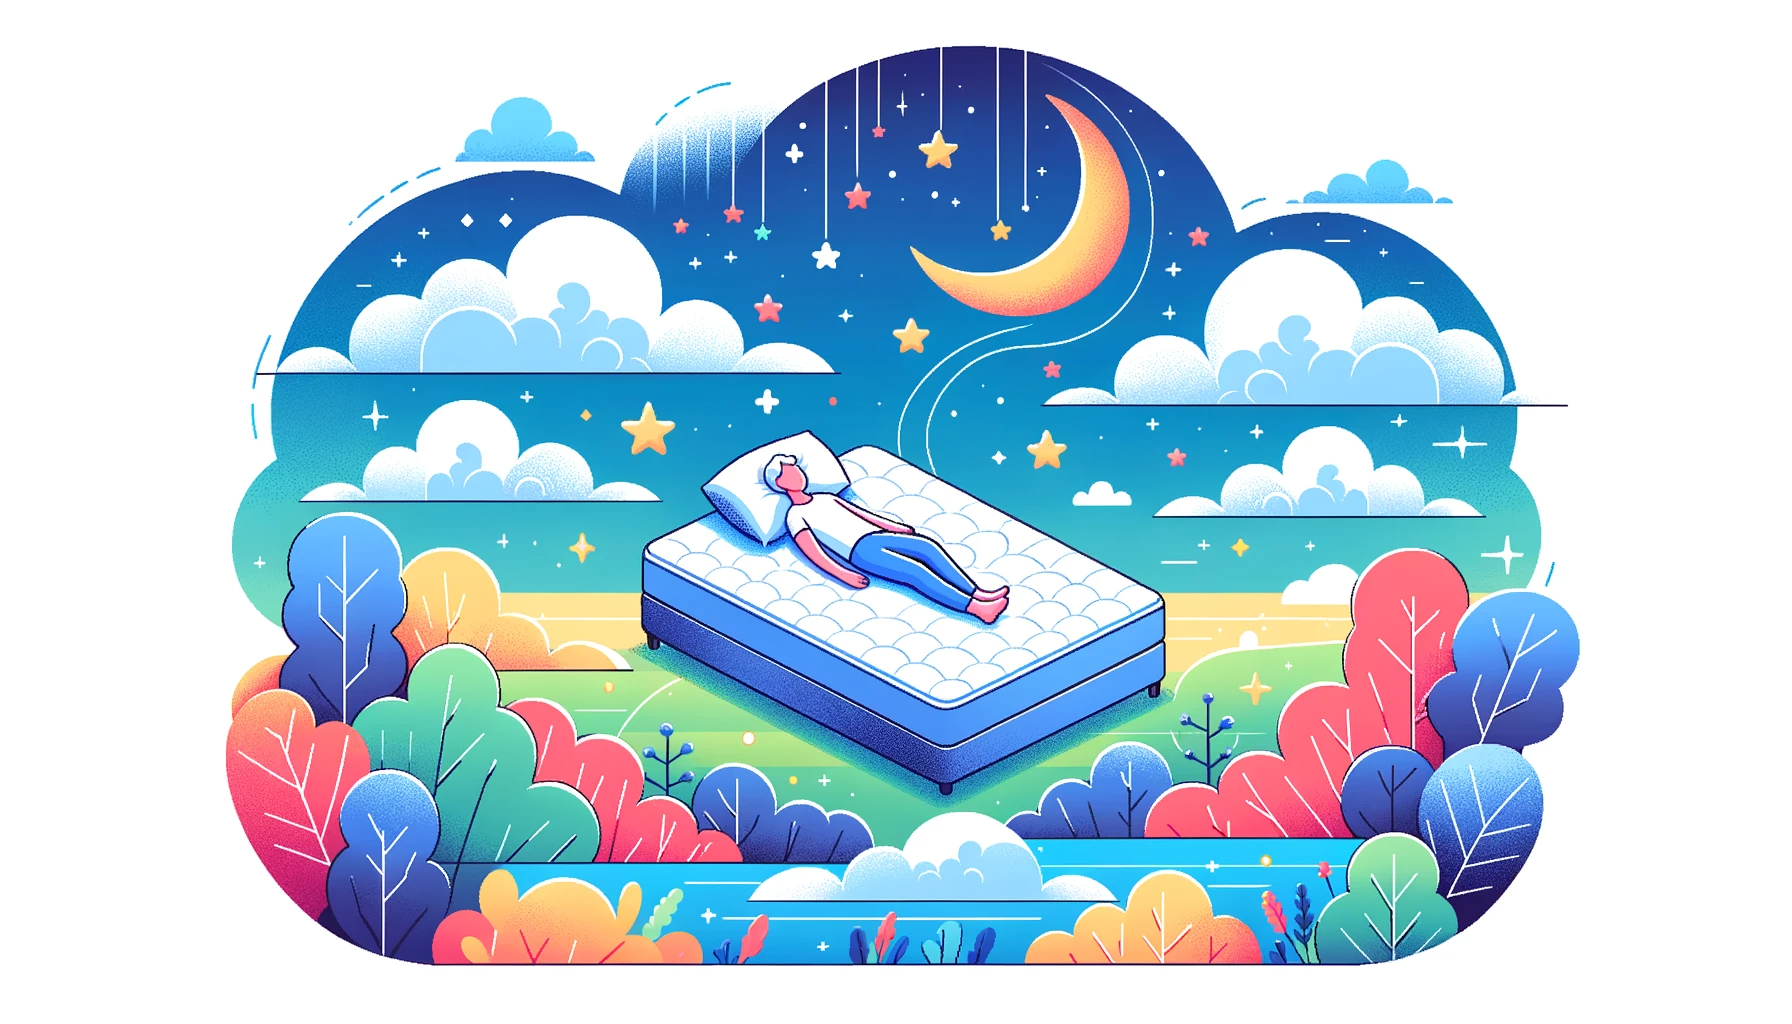 Colorful vector image depicting a person in a dreamy landscape, symbolizing their quest for perfect sleep. The landscape has fluffy clouds, stars, and a crescent moon. The person is lying comfortably on a mattress floating in the air, looking relaxed and peaceful.